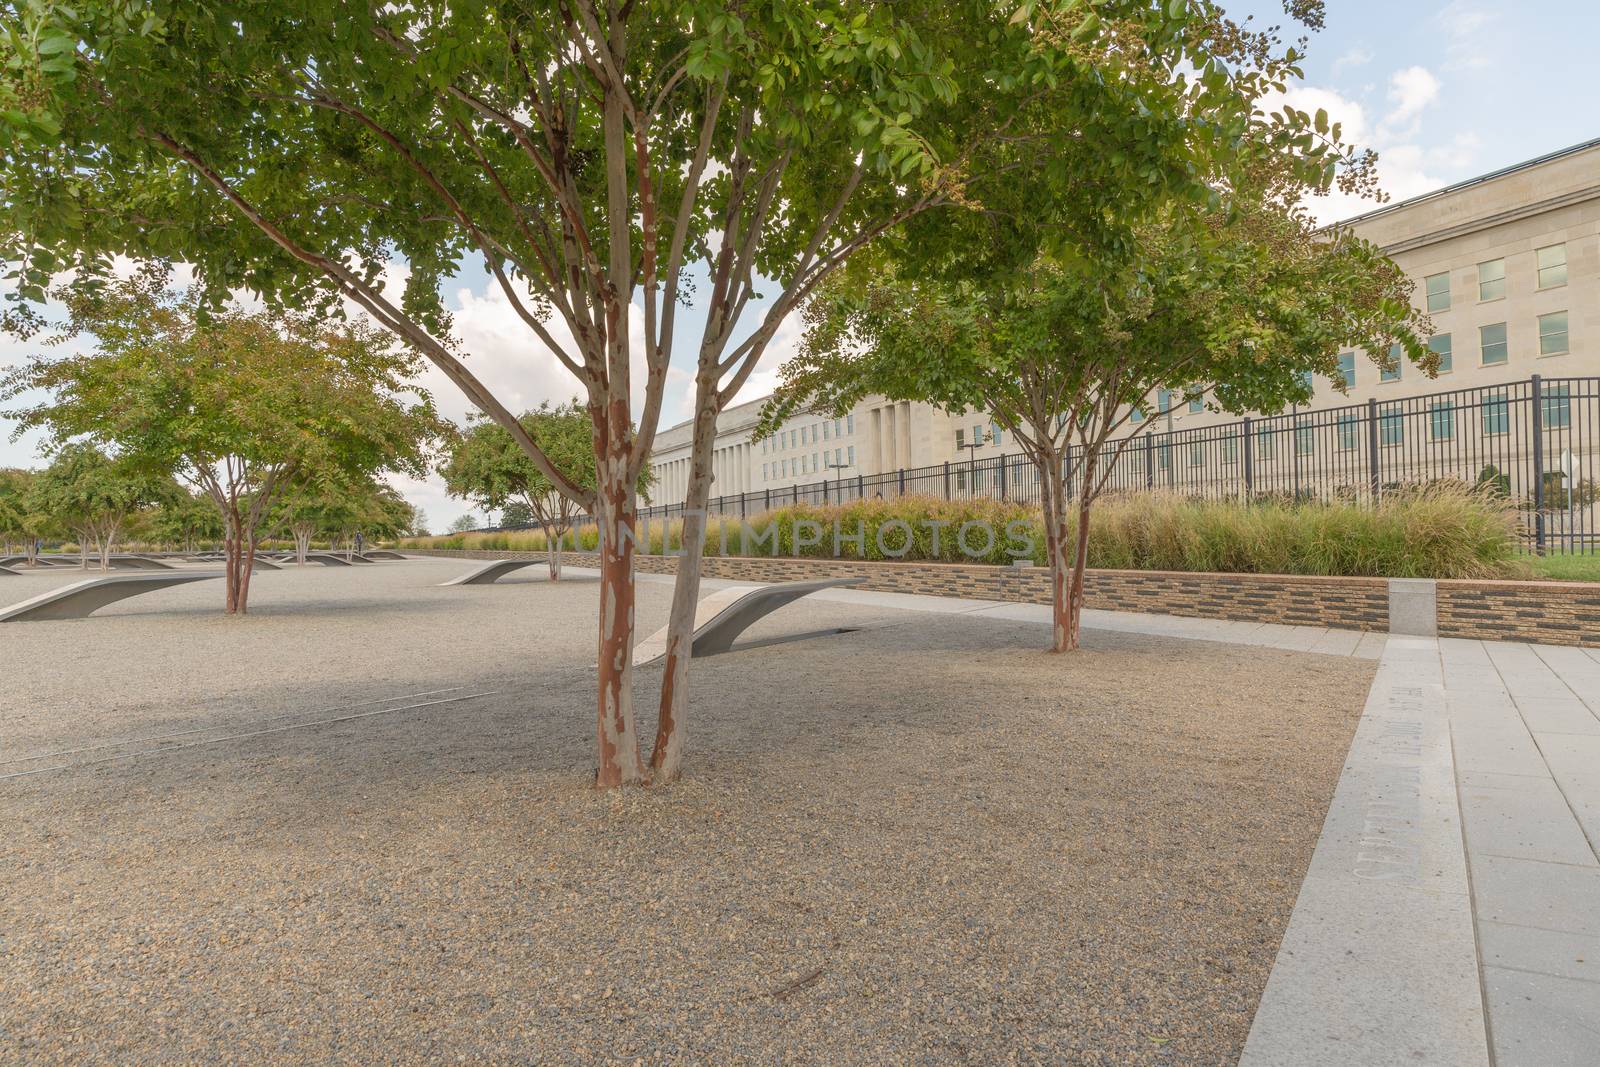 The Pentagon Memorial in Washington DC - no names on display by chrisukphoto